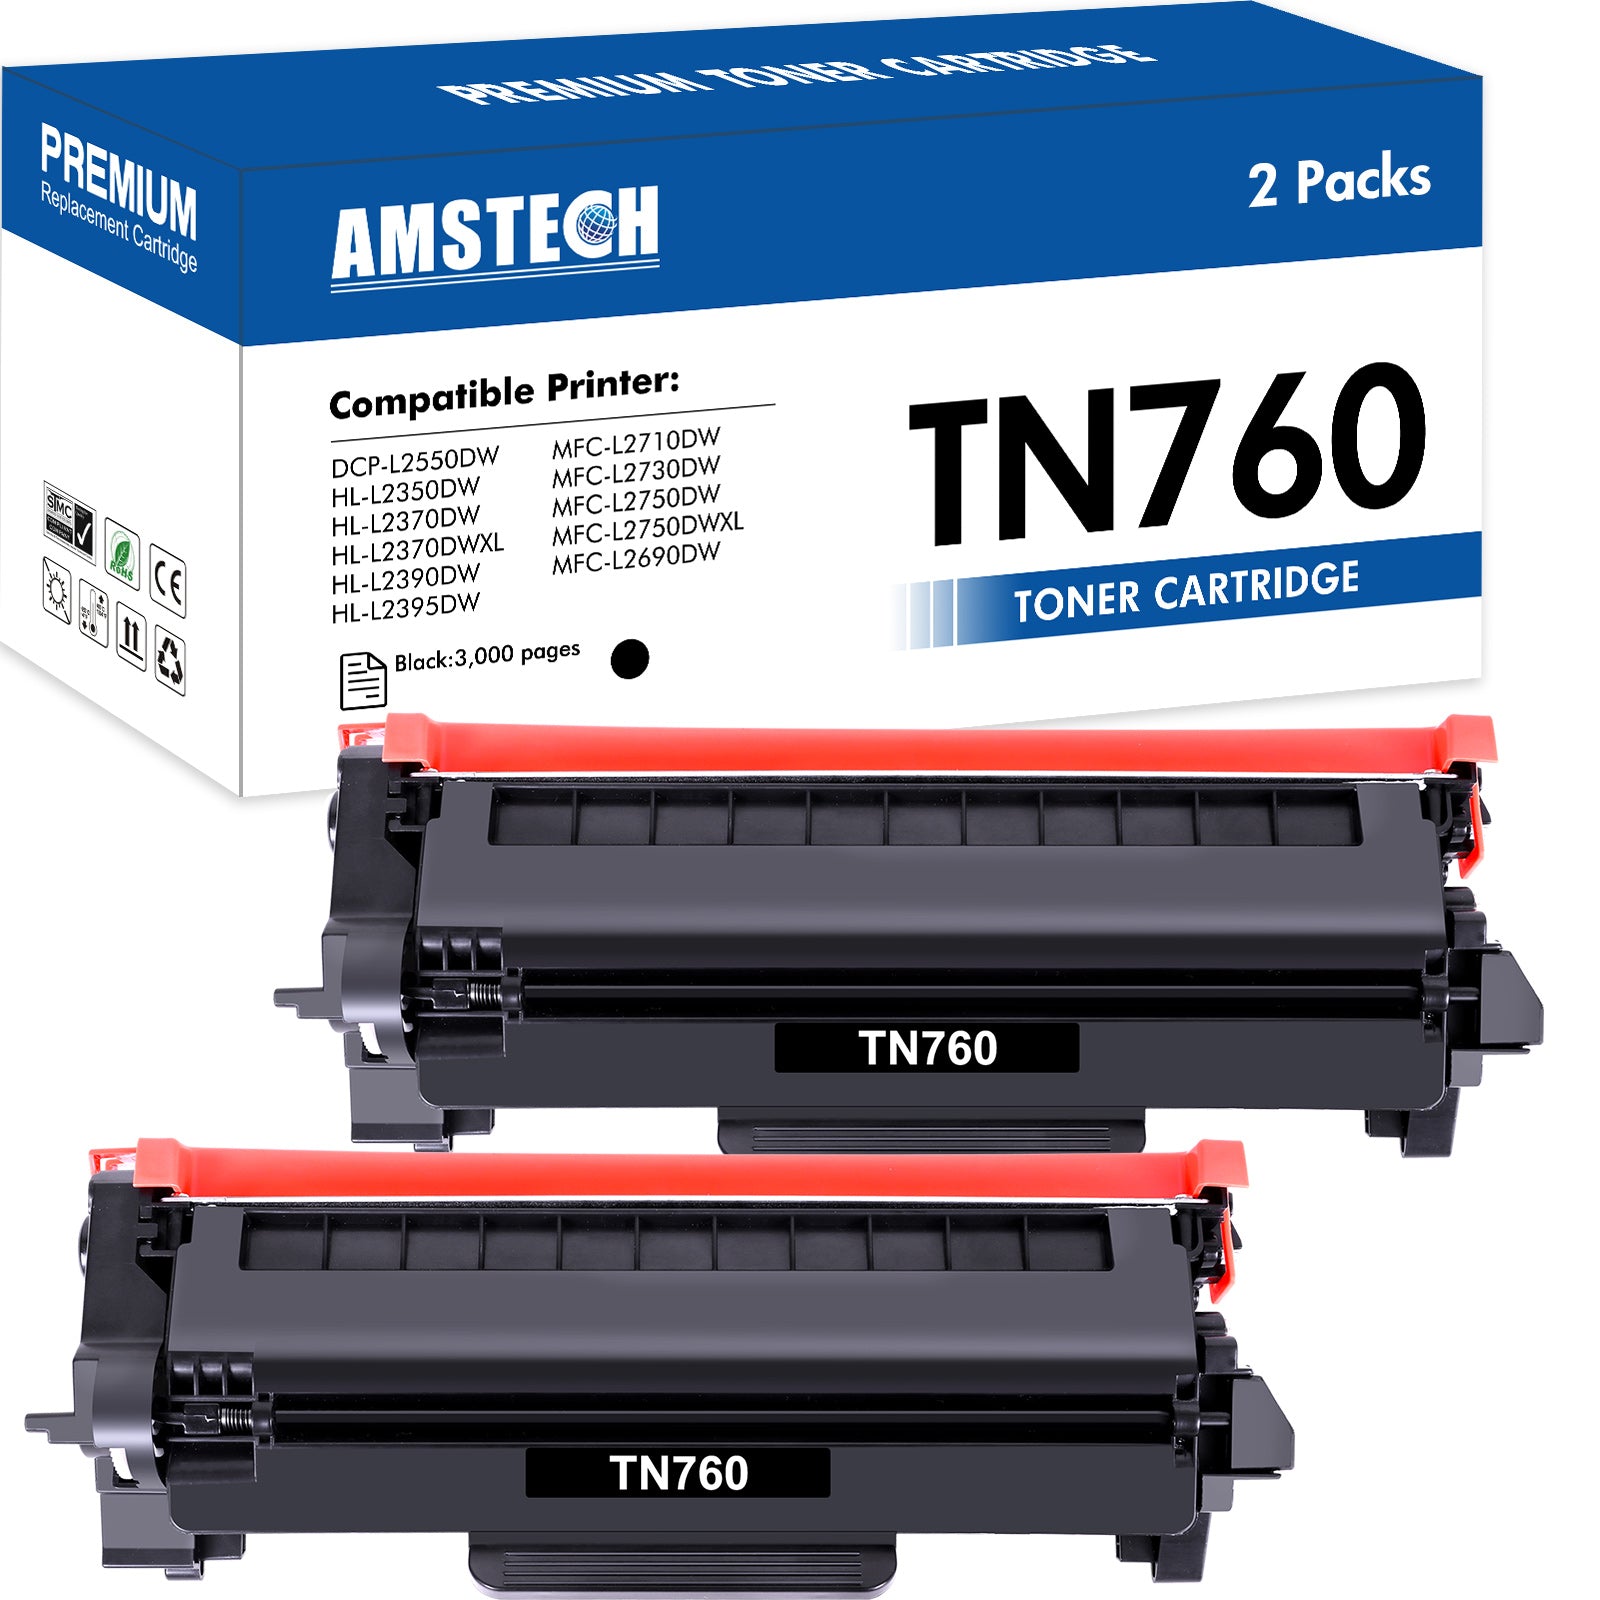 TN760 TN-760 Toner Cartridge Compatible for Brother TN760 TN 760 TN730 TN-730 DCP-L2550DW MFC-L2710DW MFC-L2750DW HL-L2350DW HL-L2395DW MFC-L2750DW Printer Ink (Black, 2-Pack)